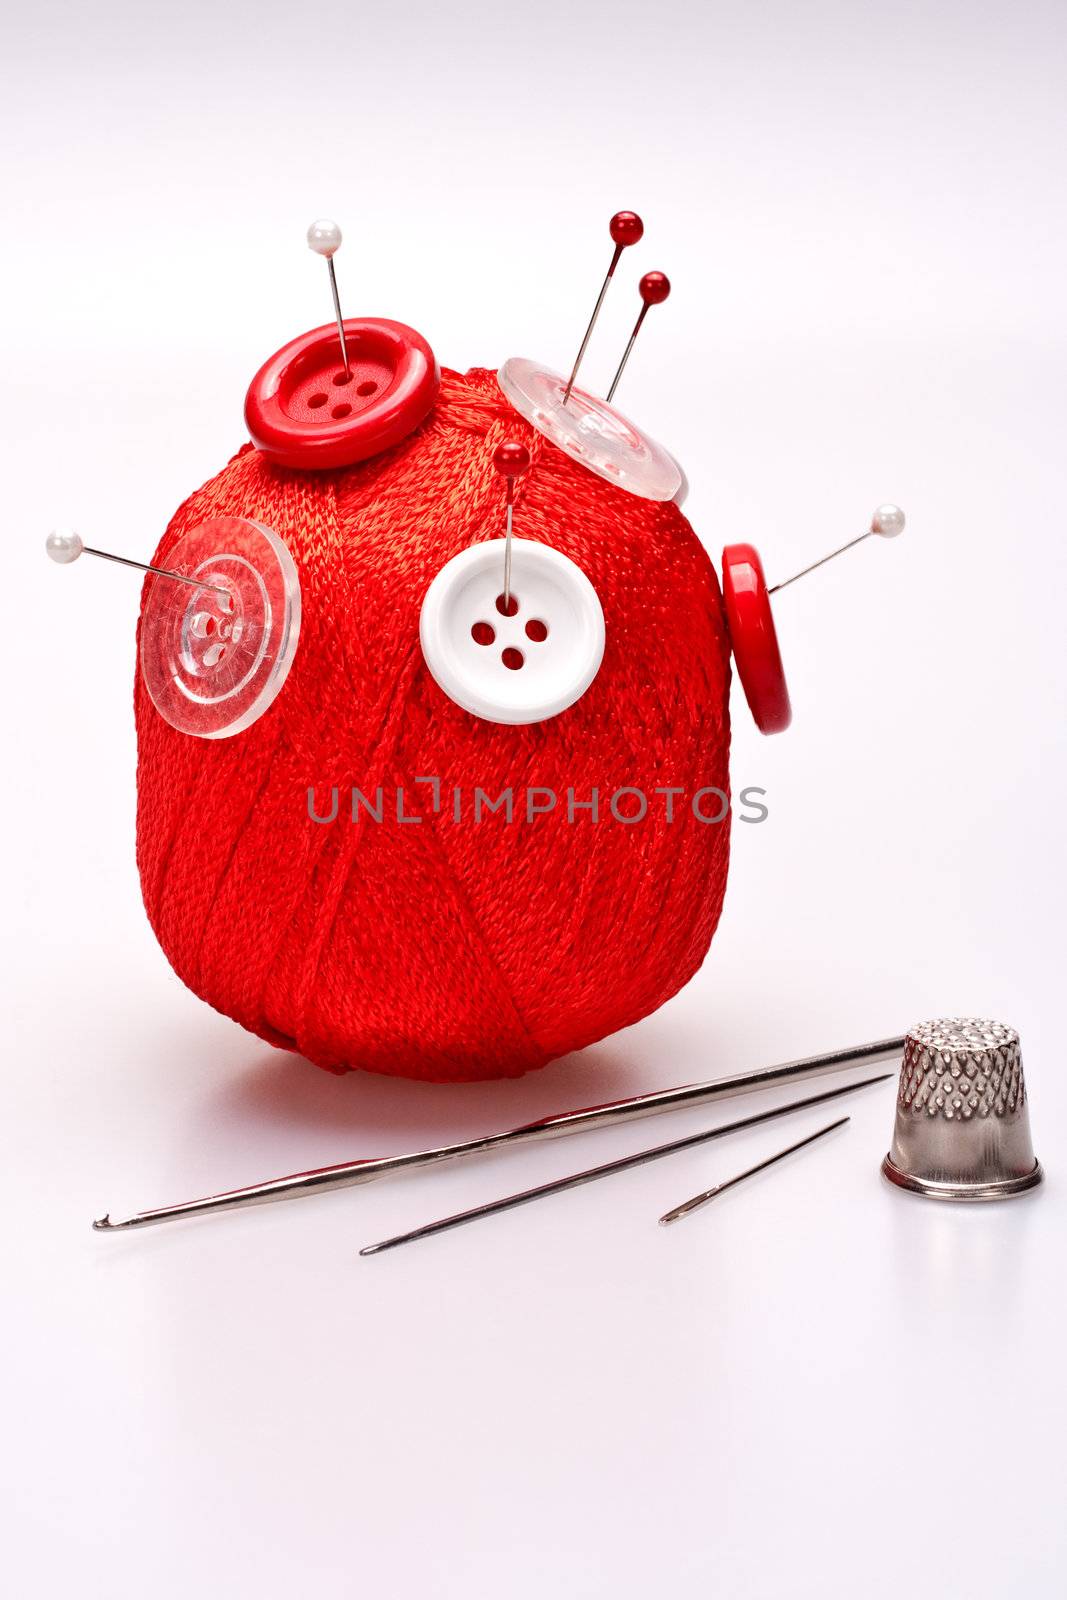 red and white pins in red wool ball with buttons